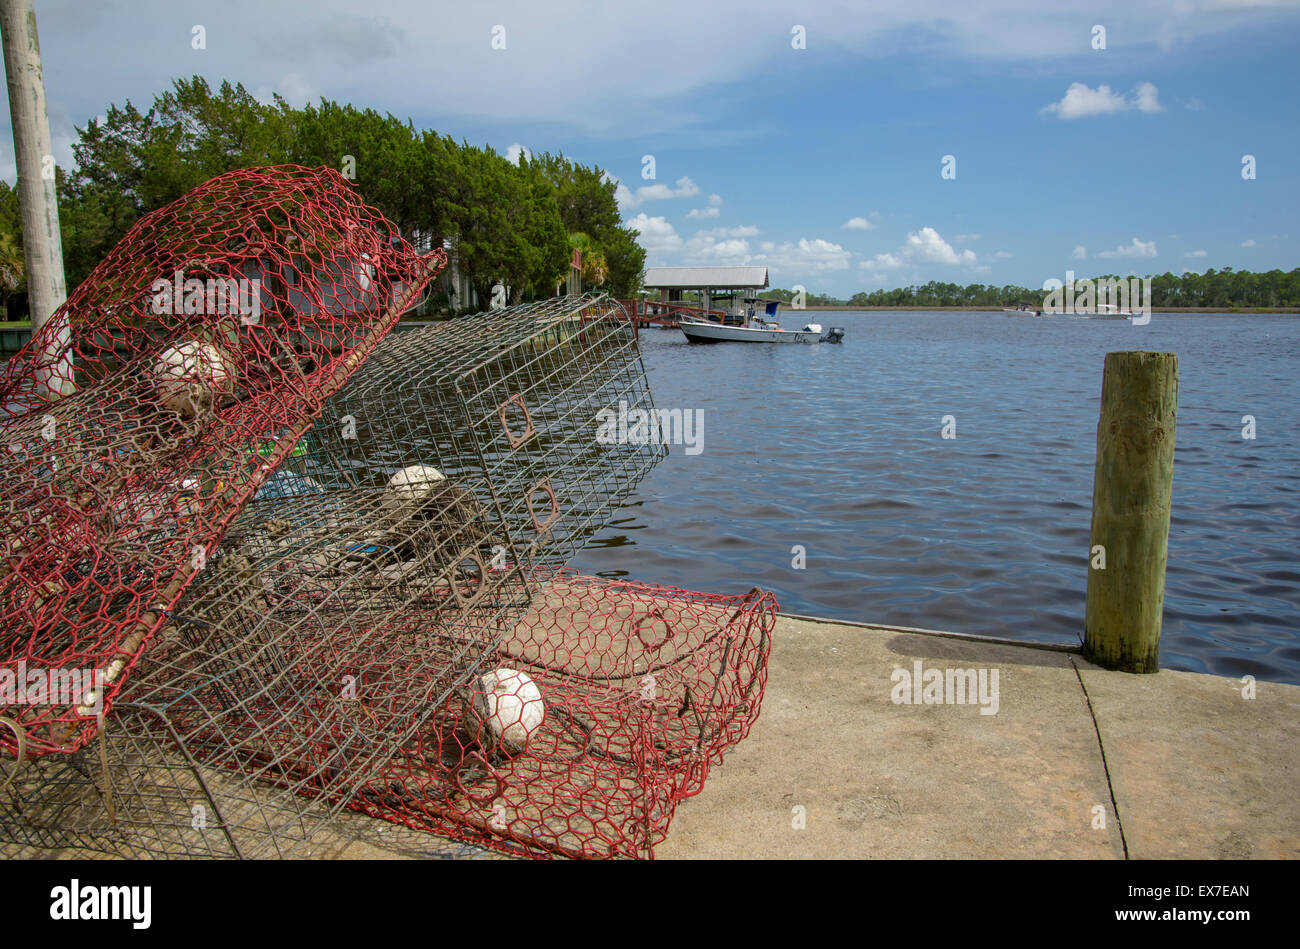 Crab nets on pier at old fish house location, Steinhatchee, FL Stock Photo